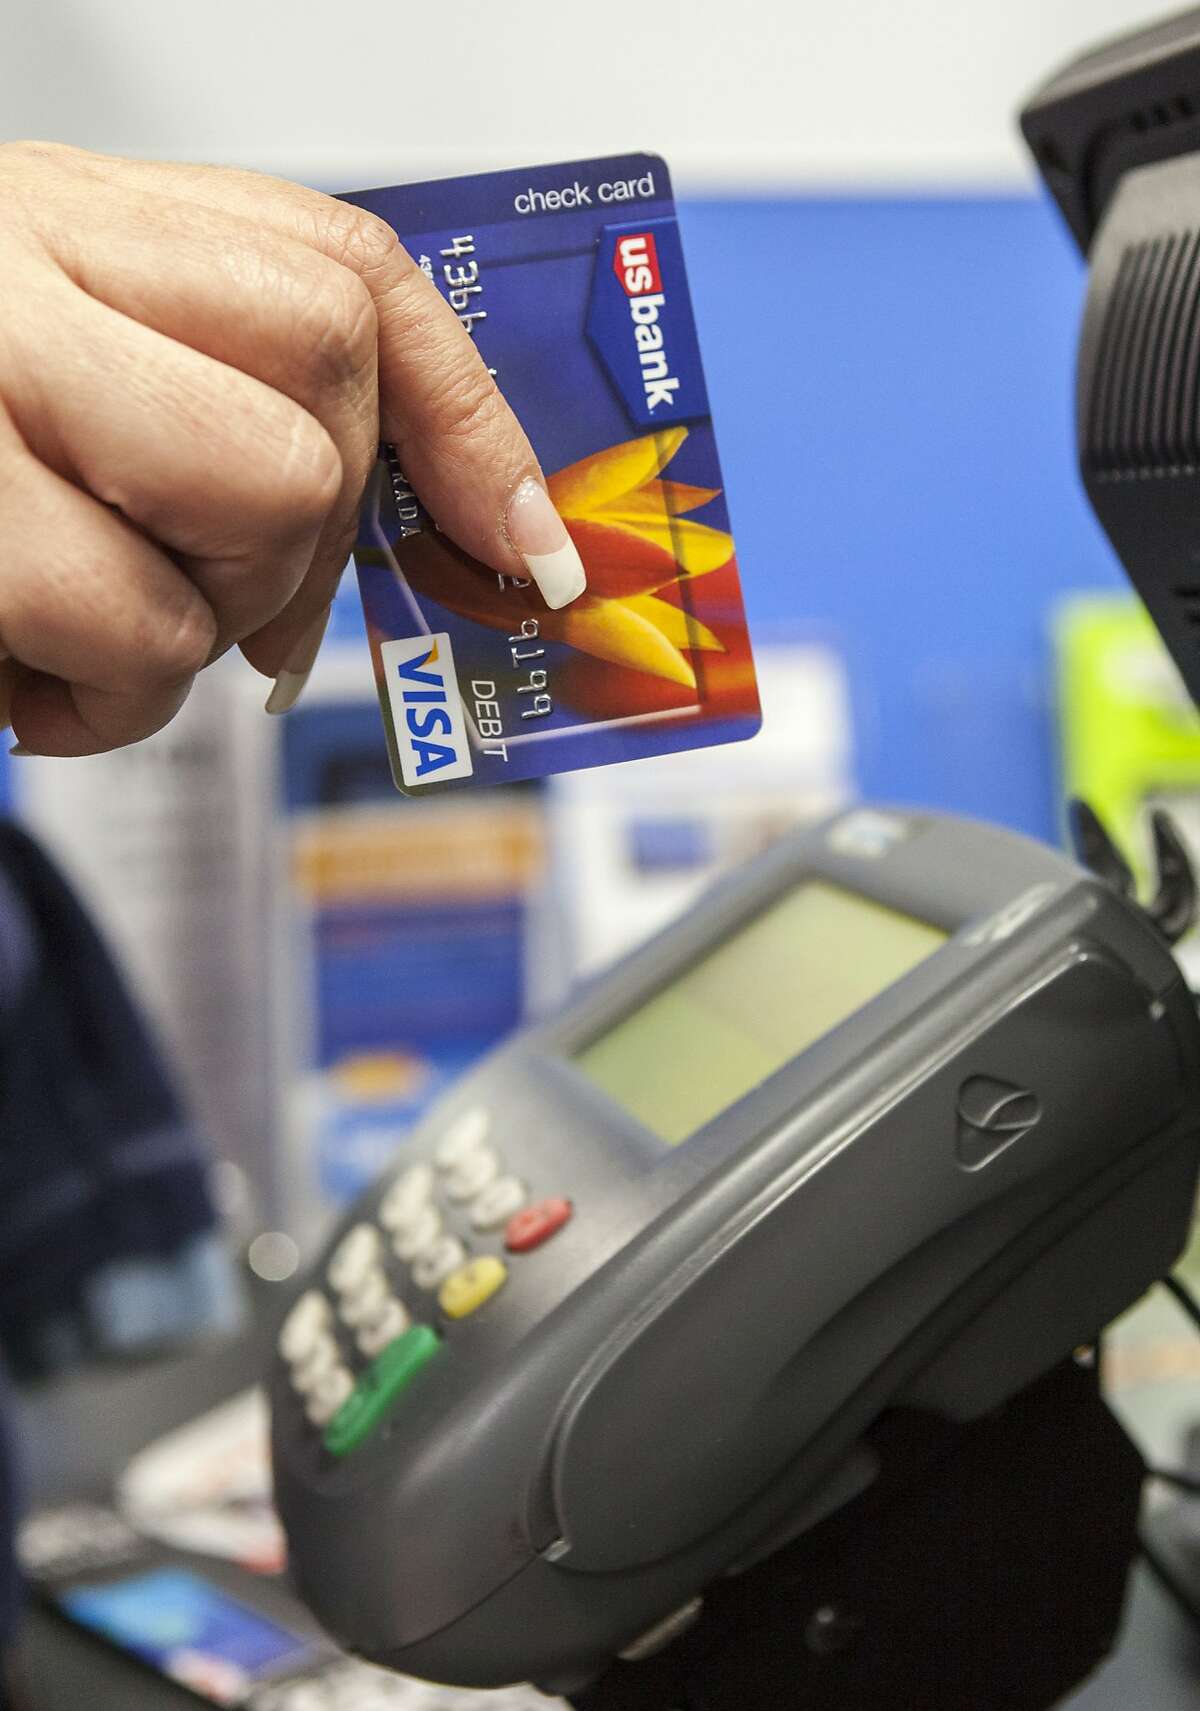 A consumer pays with a US Bank VISA debit card, as she shops for Thanksgiving celebrations at the Pre-Black Friday event at the Walmart Supercenter store in Rosemead, Calif., Wednesday, Nov. 21, 2012. (AP Photo/Damian Dovarganes)